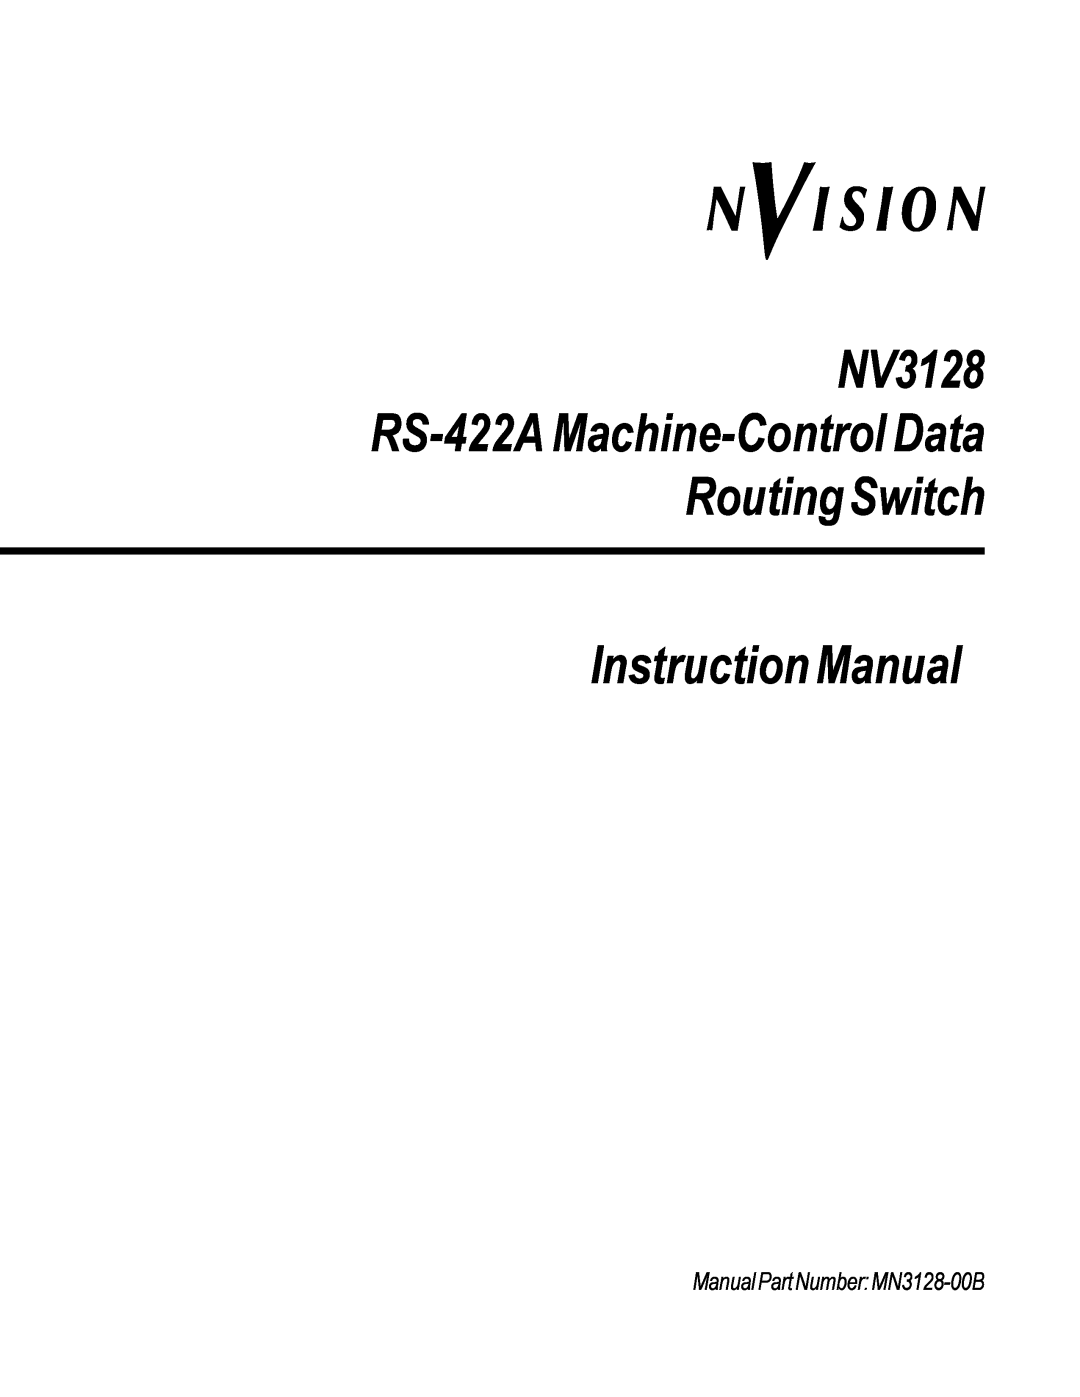 Envision Peripherals NV3128 manual ManualPartNumberMN3128-00B, Nvision, RoutingSwitch Instruction Manual 